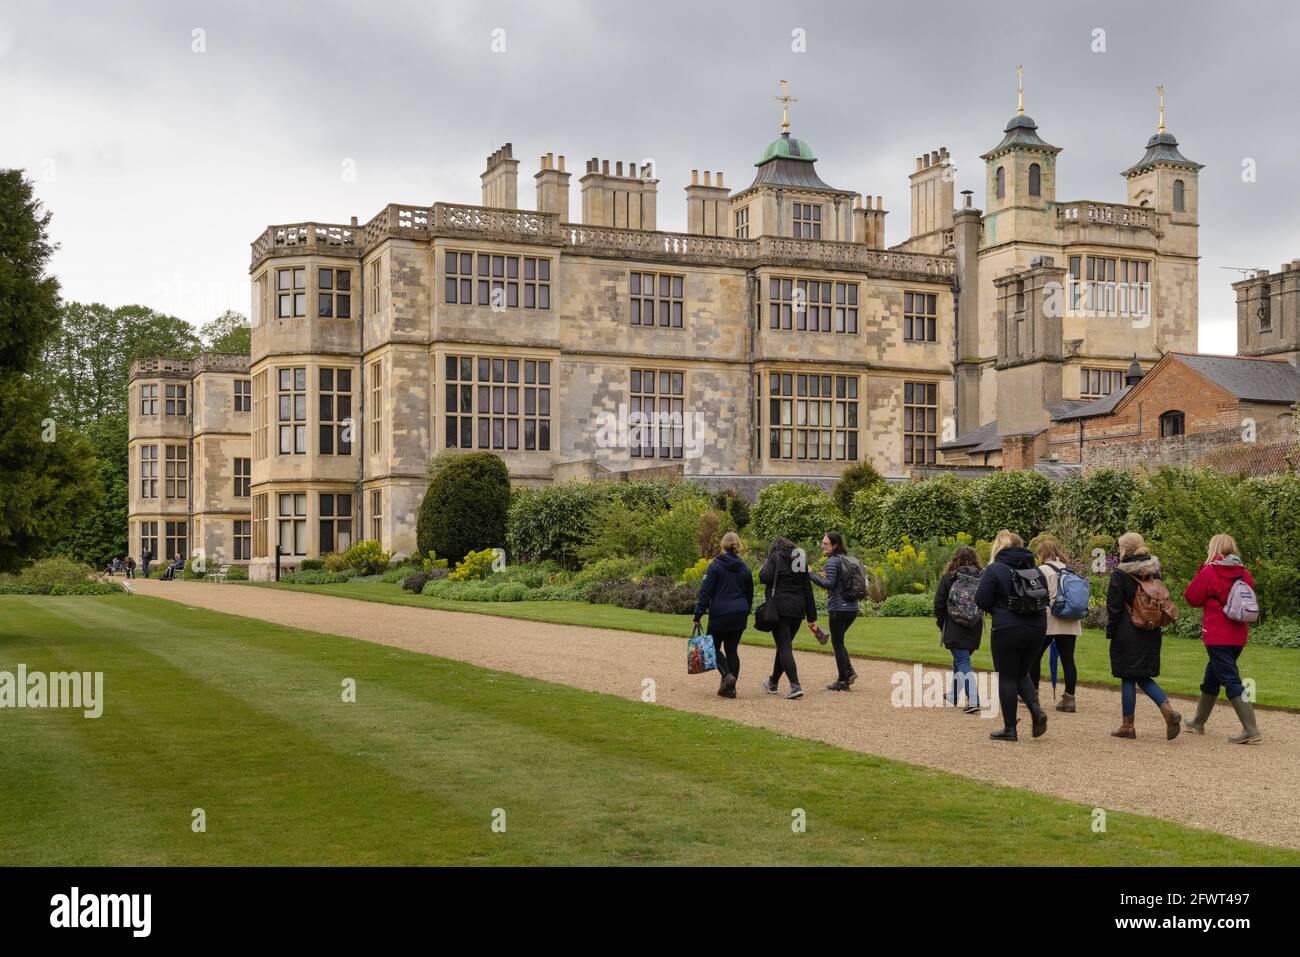 Audley End; visitors at the 17th century Jacobean Audley End House and Gardens, owned by English Heritage, Audley End, Cambridgeshire UK Stock Photo